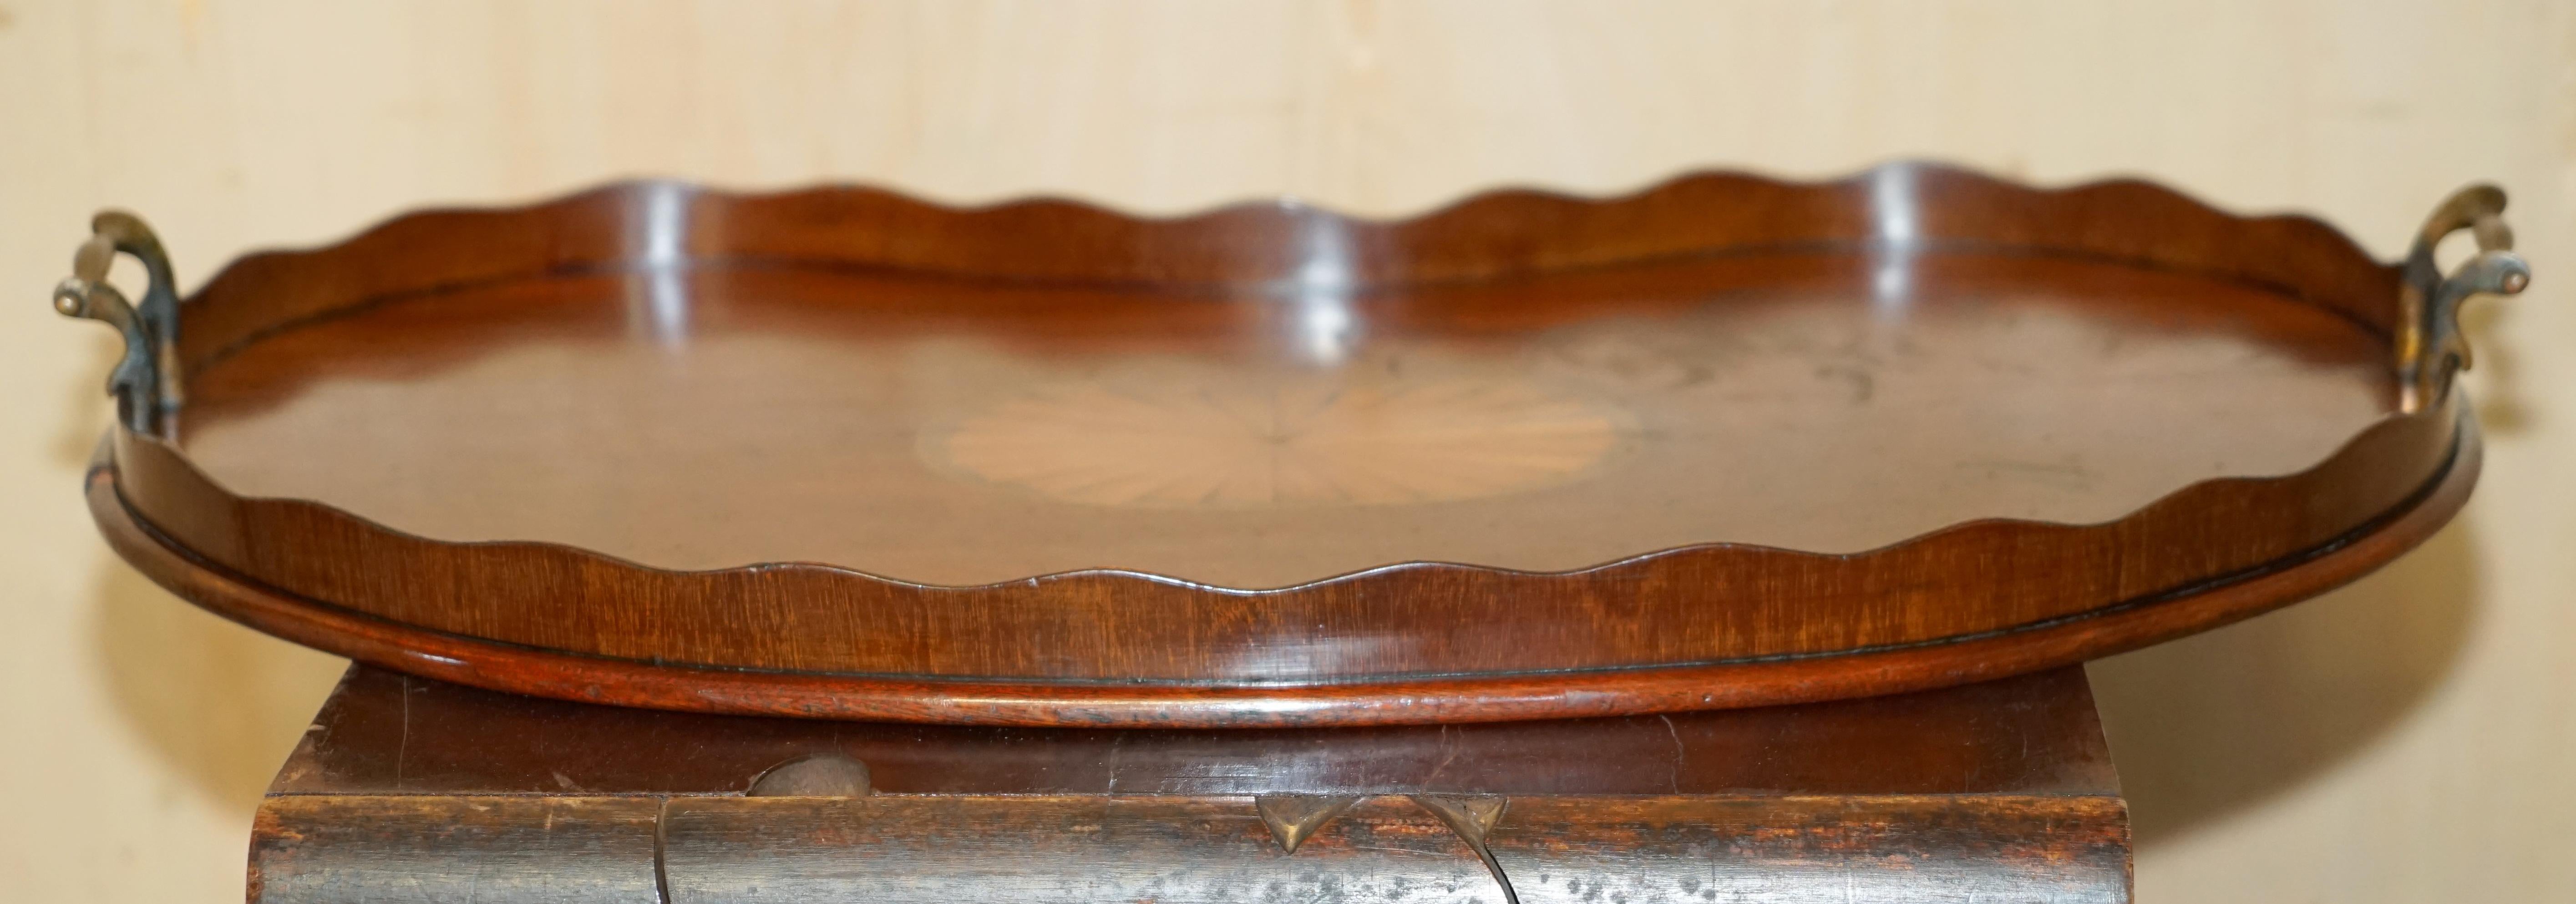 ANTIQUE CiRCA 1880 SHERATON REVIVAL SATINWOOD WALNUT SERVING TRAY BRONZE HANDLEs For Sale 10